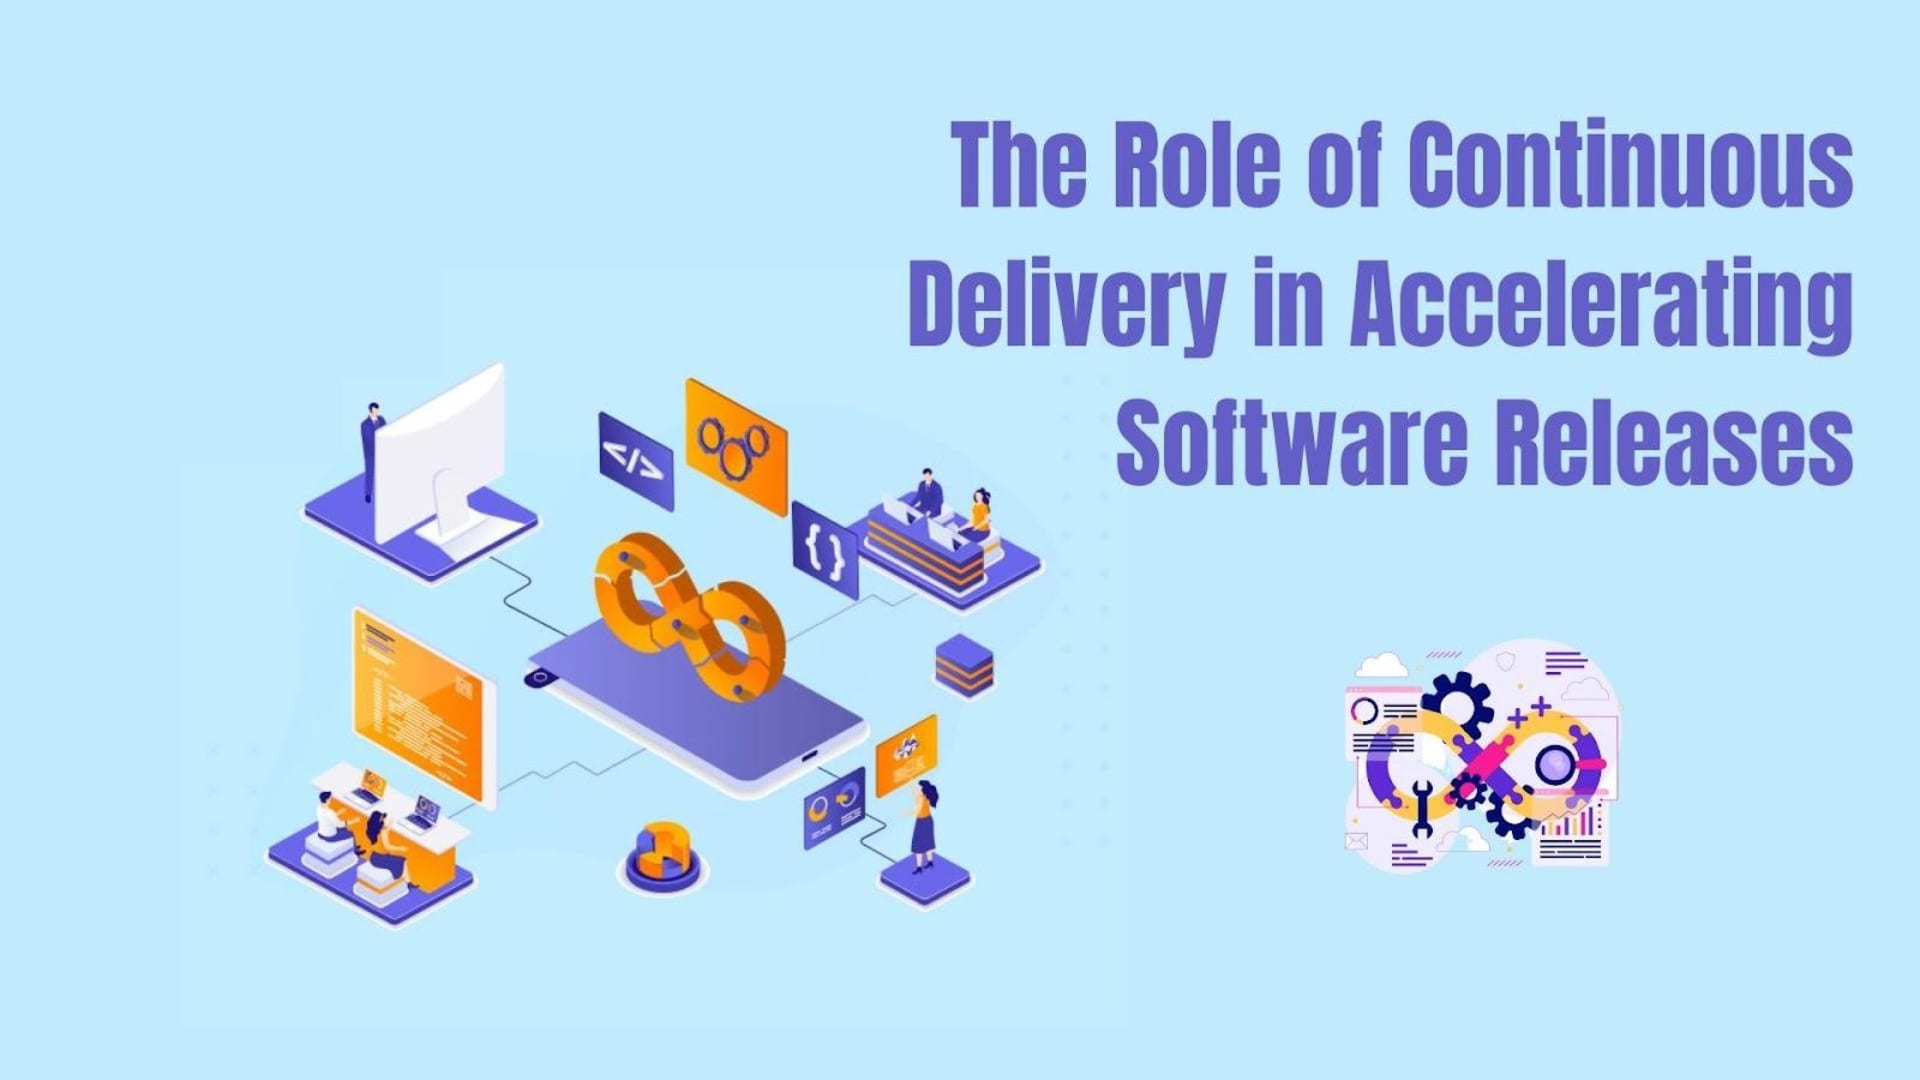 The Role of Continuous Delivery in Accelerating Software Releases